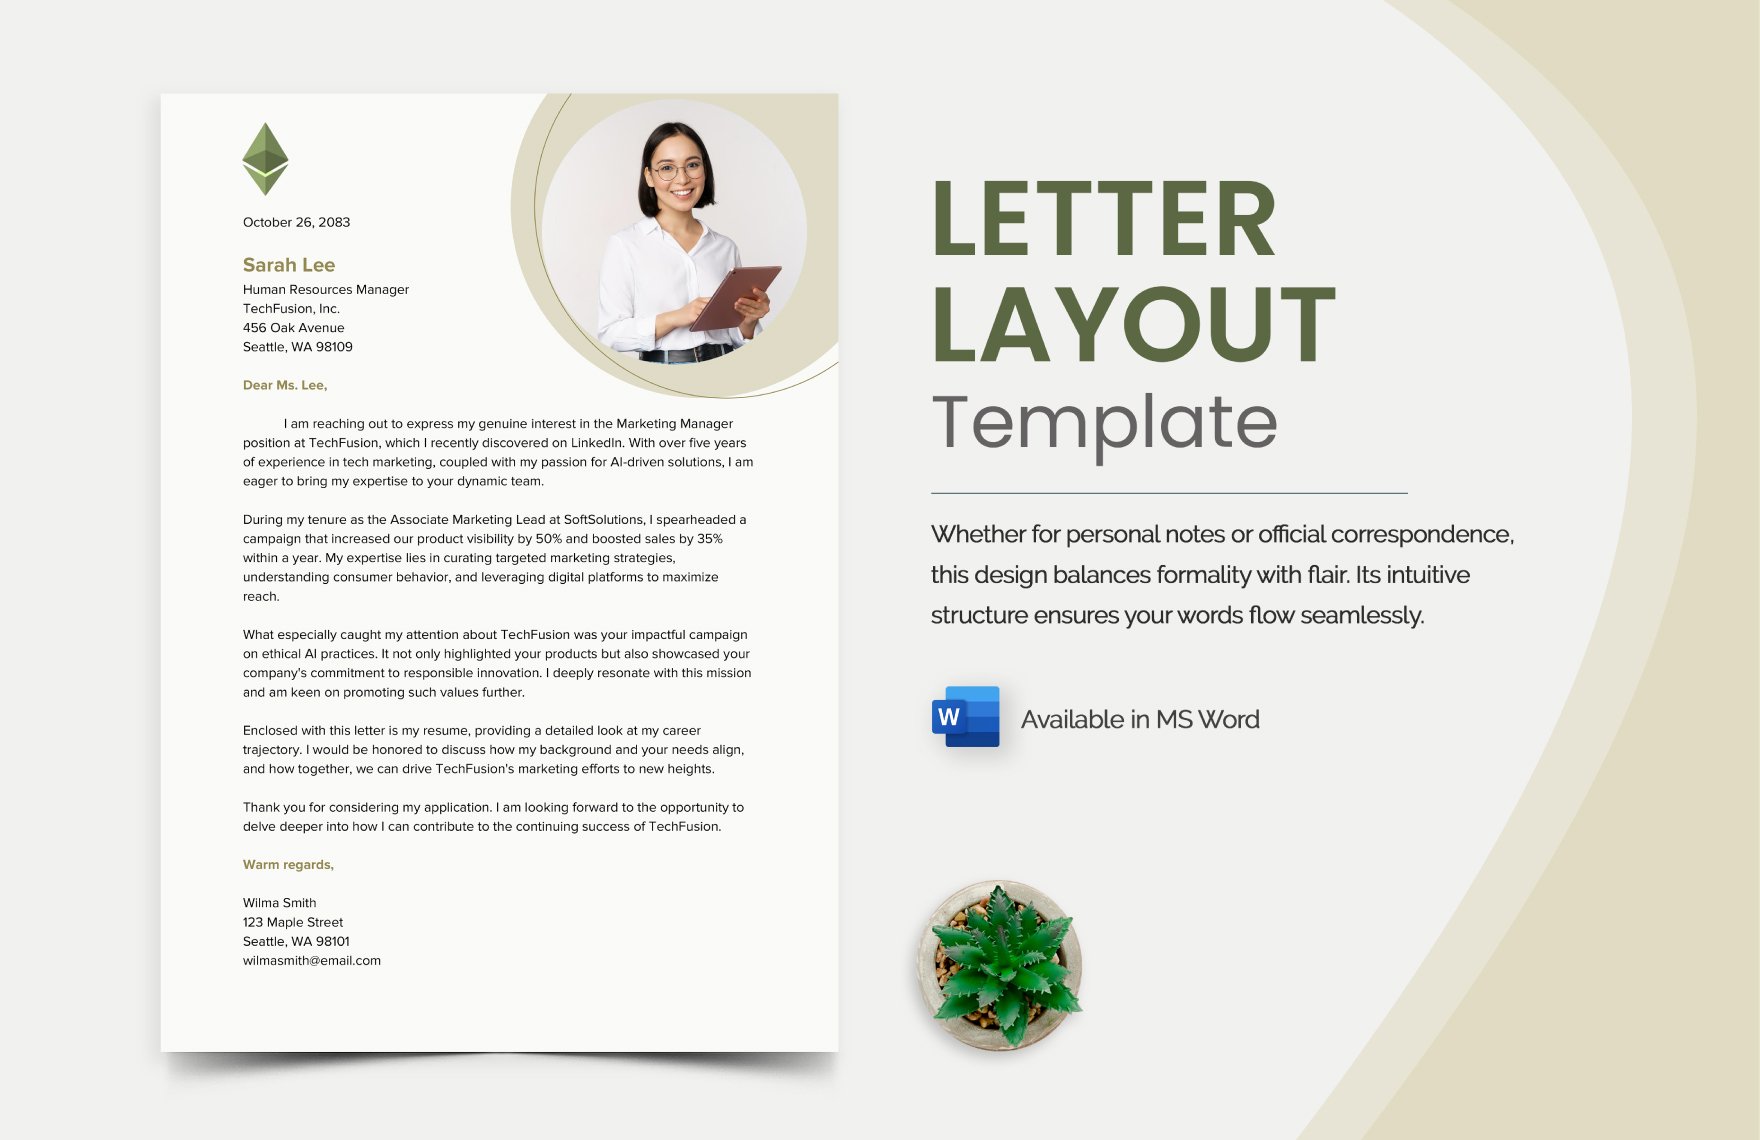 Letter Layout Template